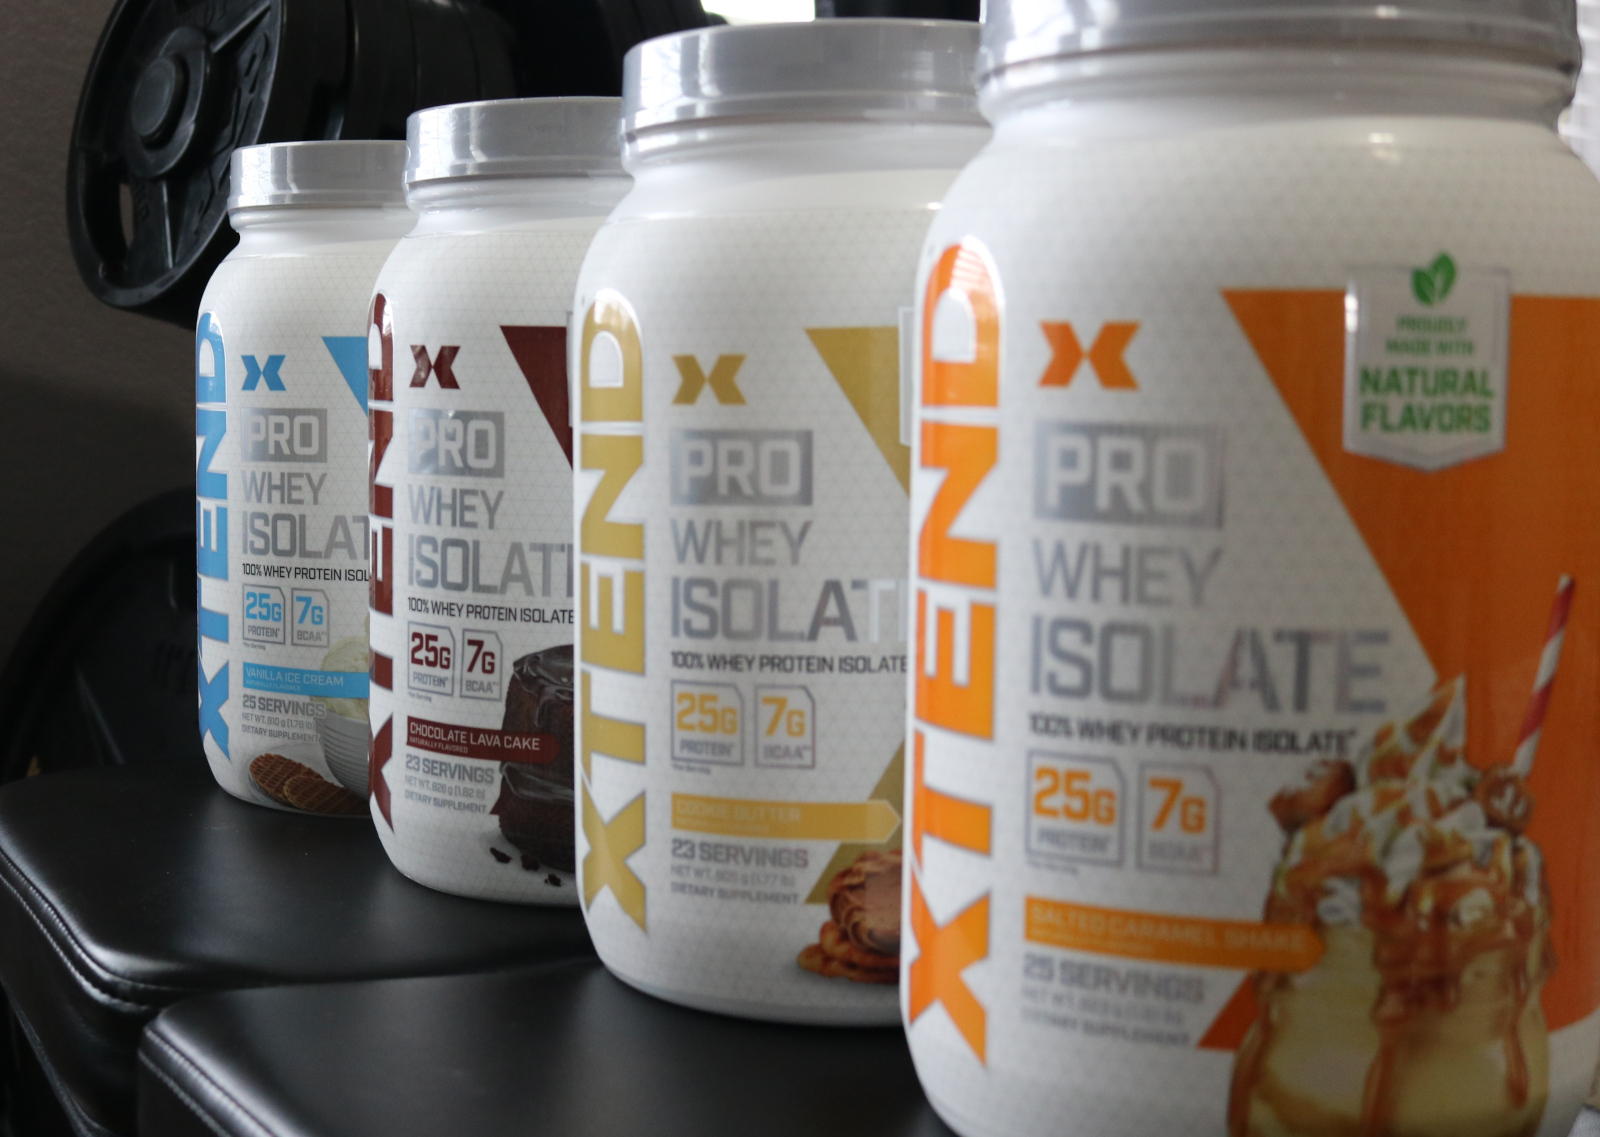 Xtend Pro Whey Isolate